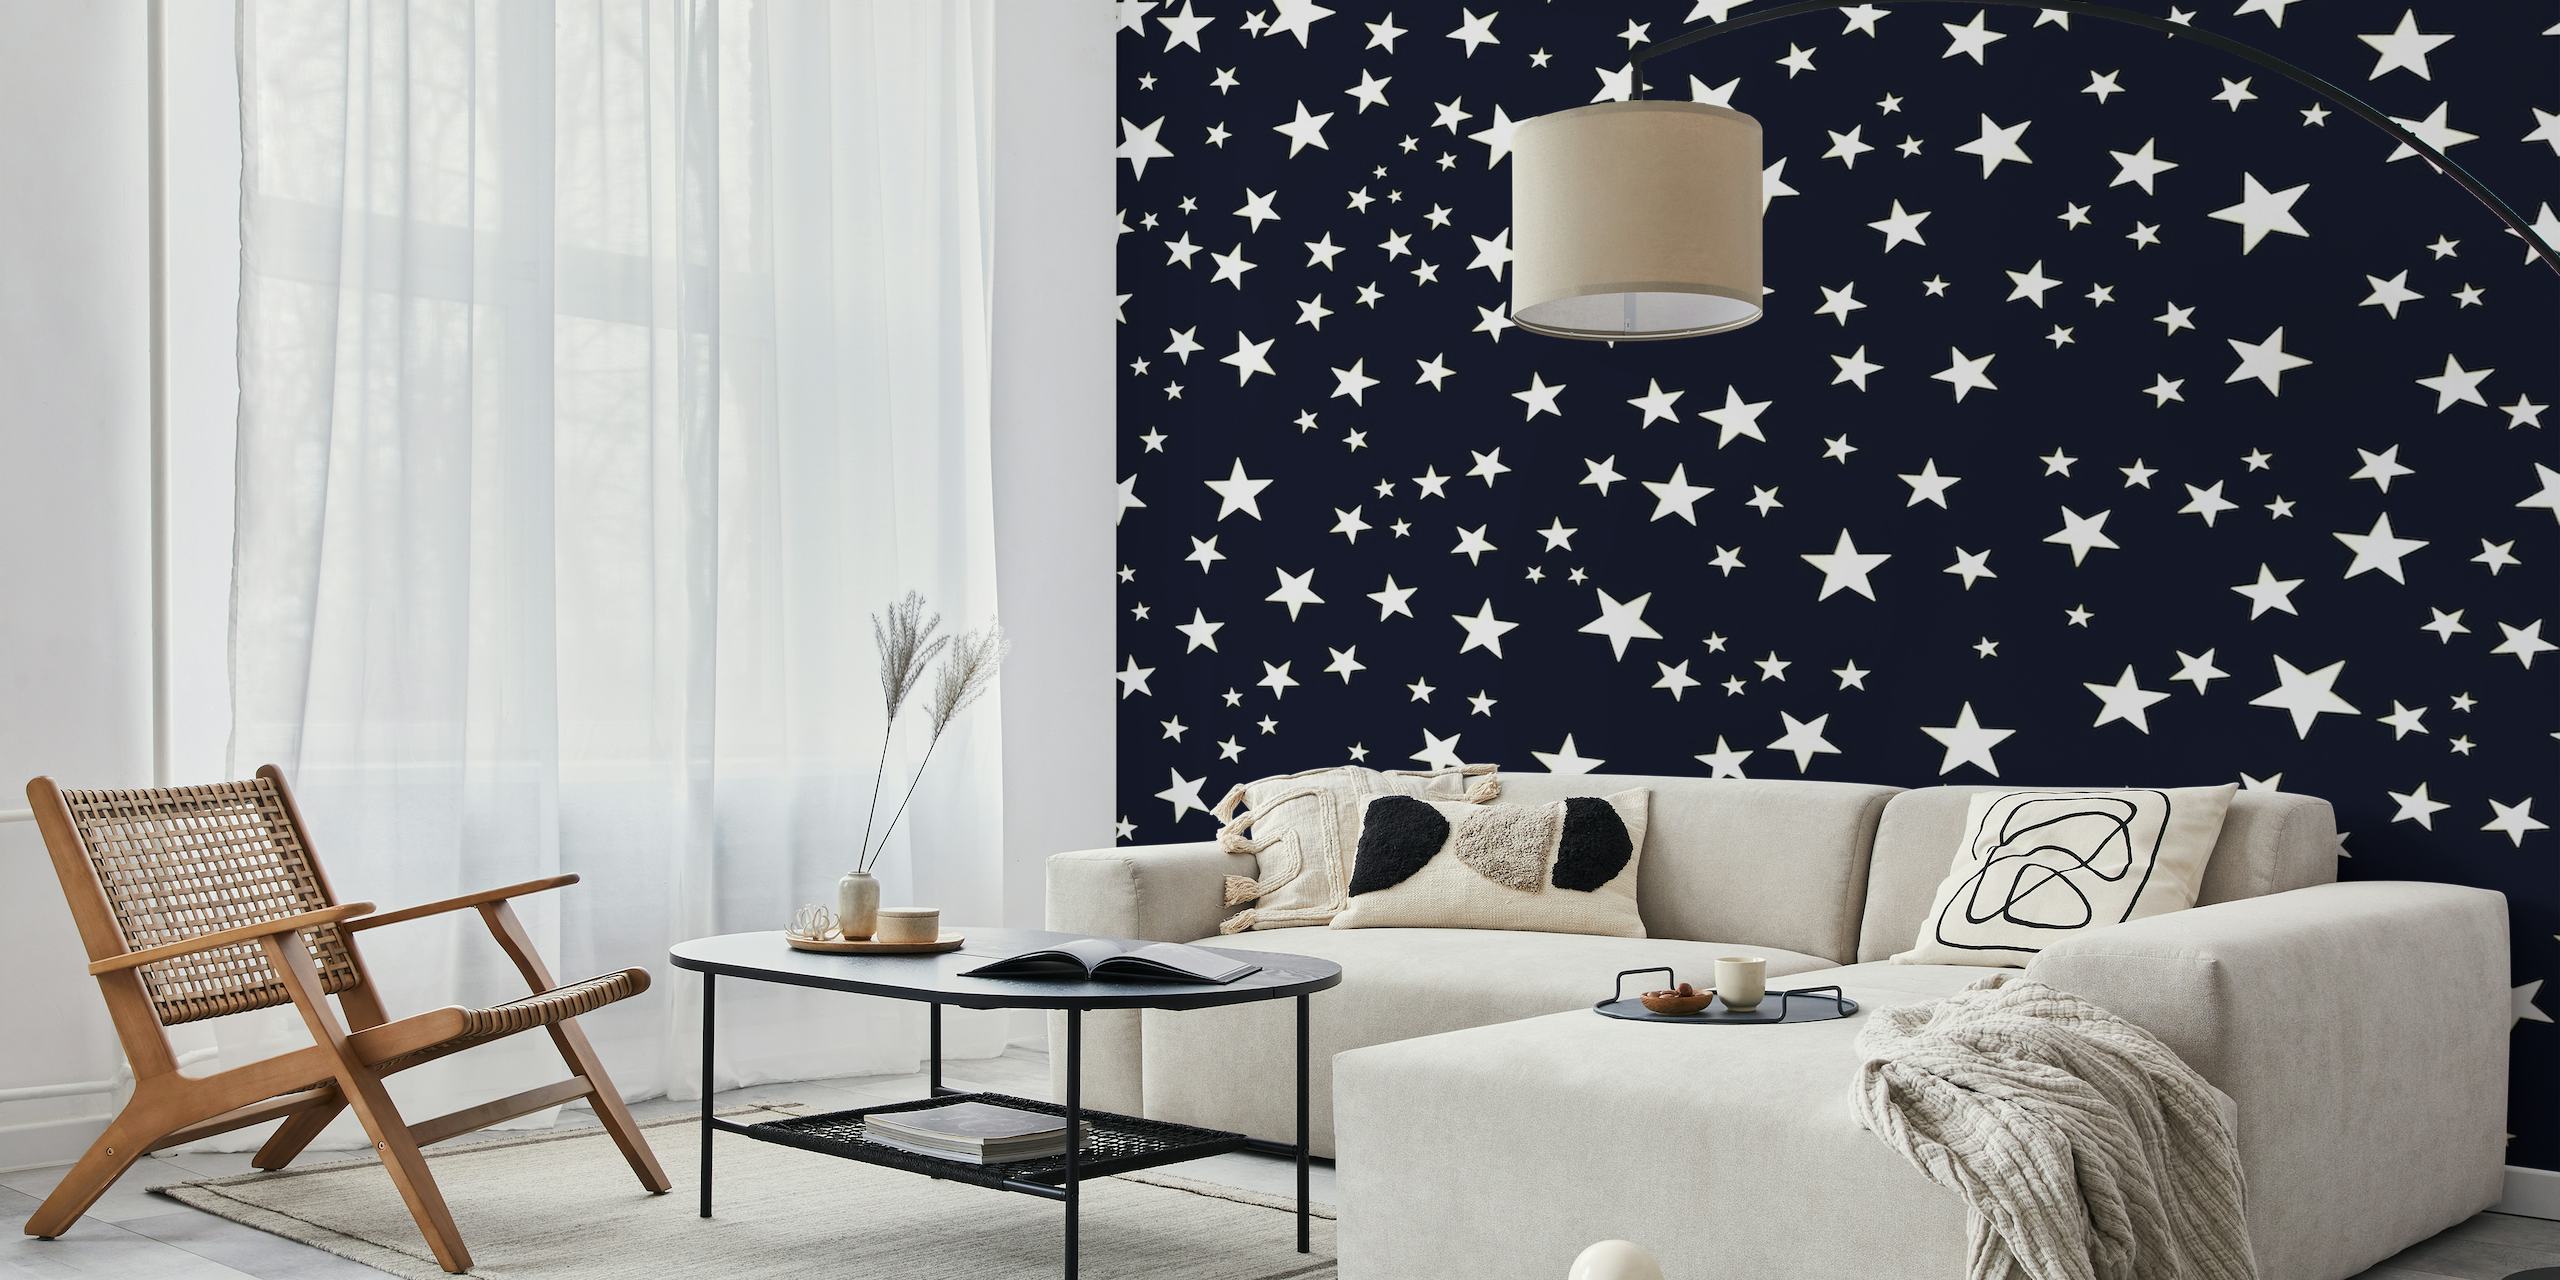 Golden and white stars on navy background wall mural